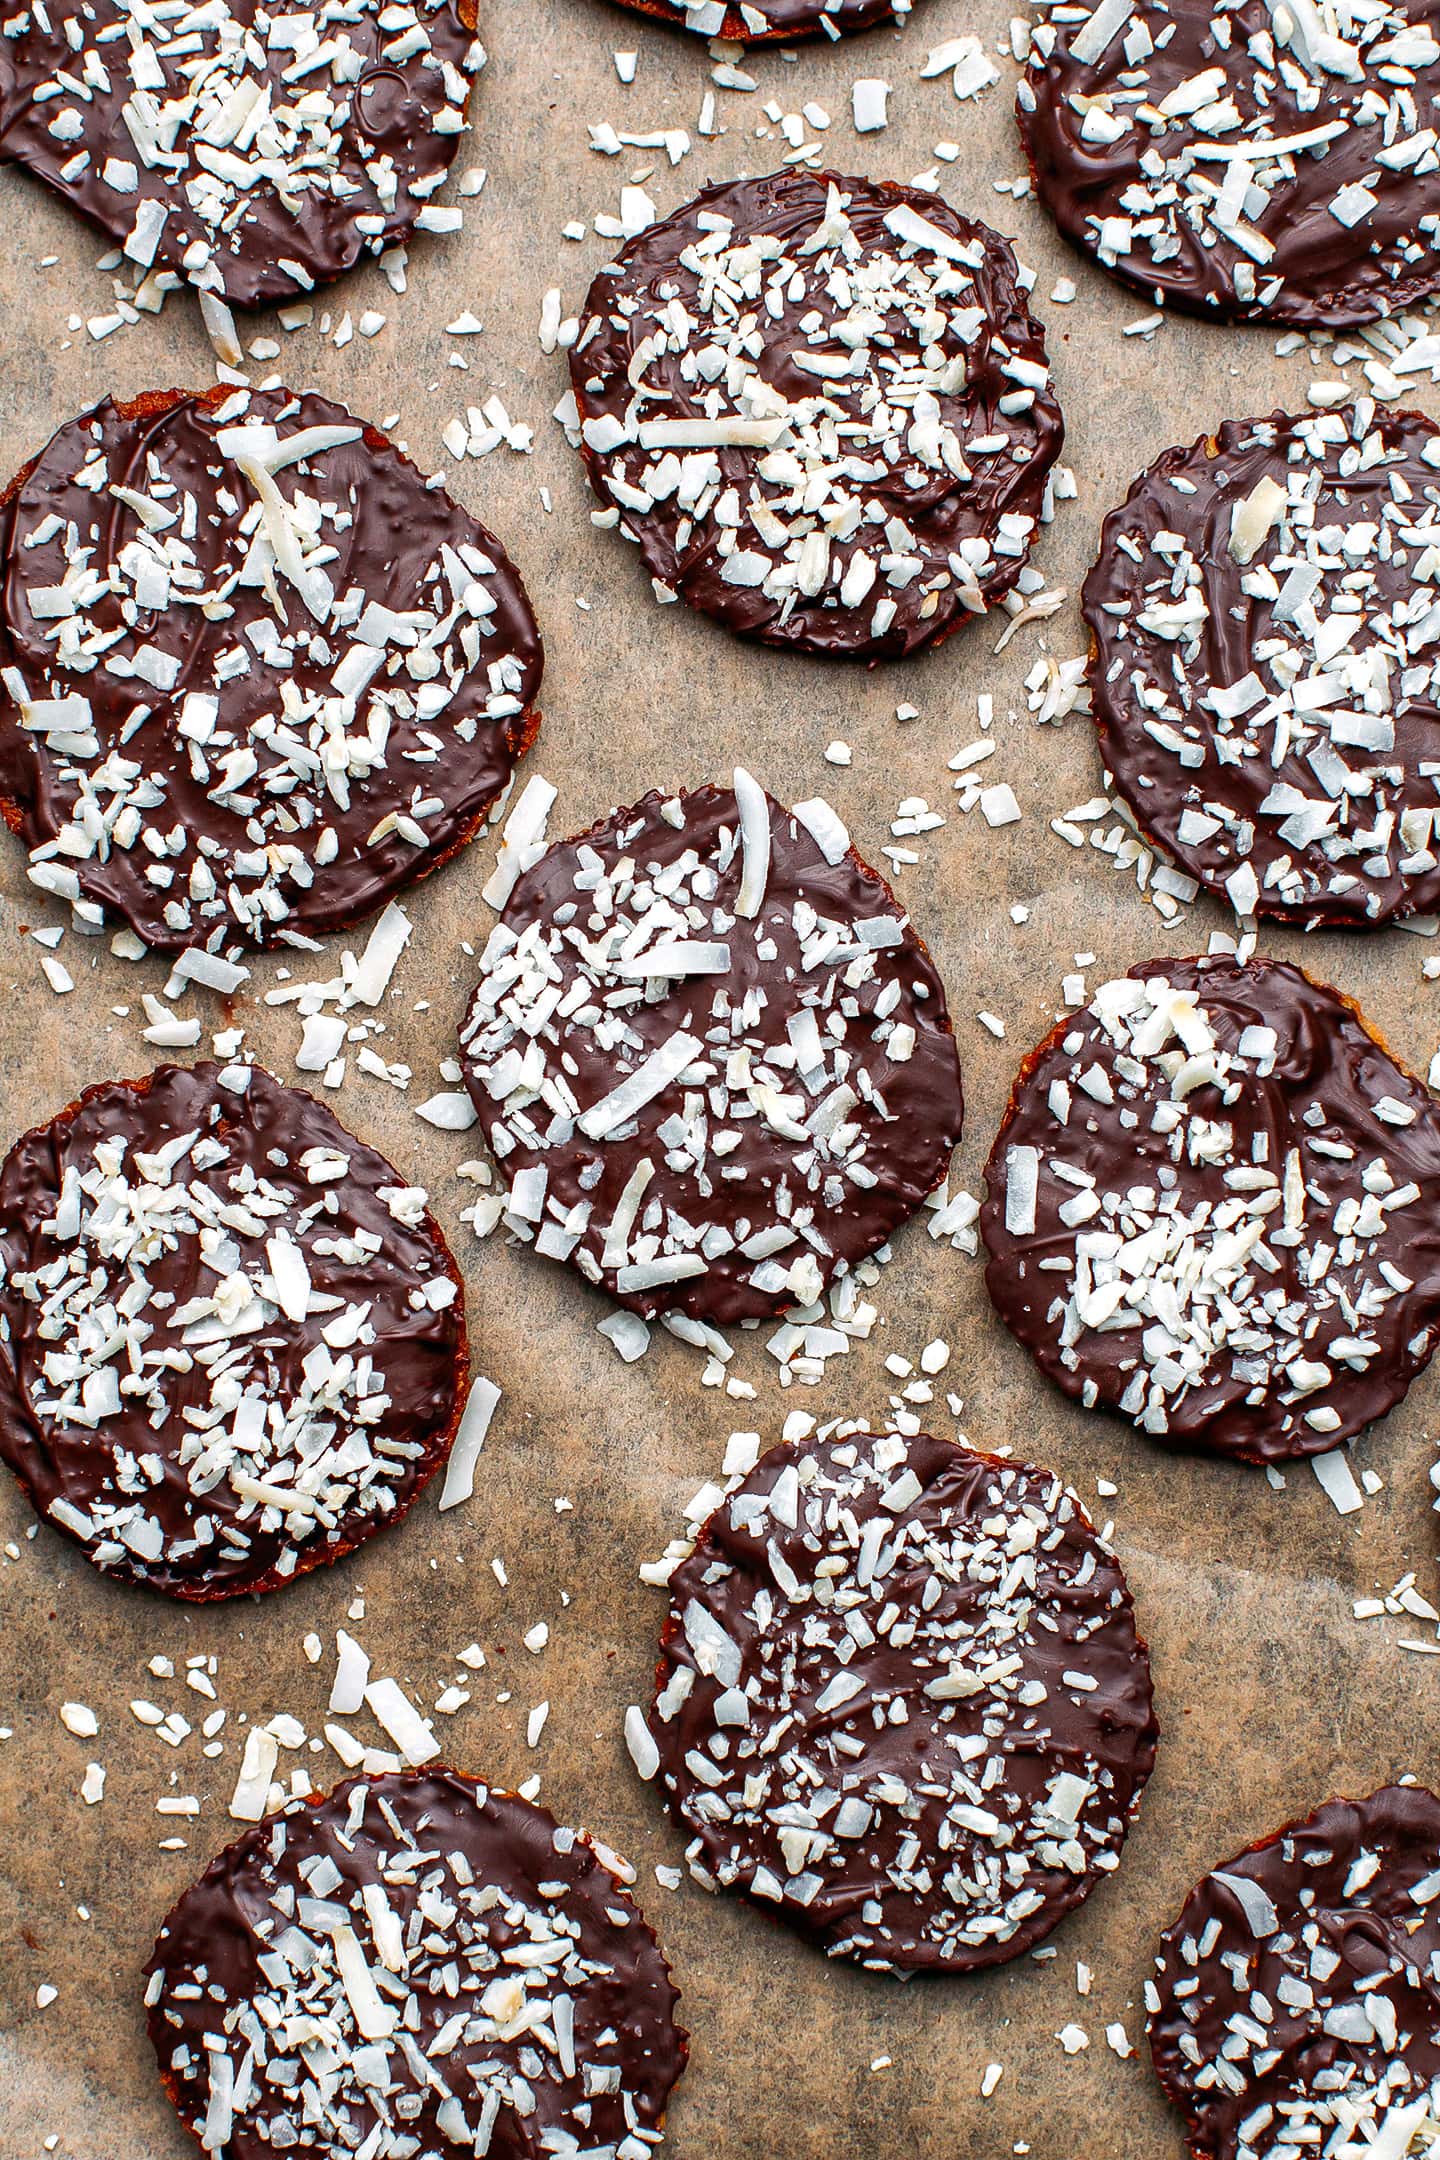 Thin cookies coated with dark chocolate and shredded coconut on a baking sheet.